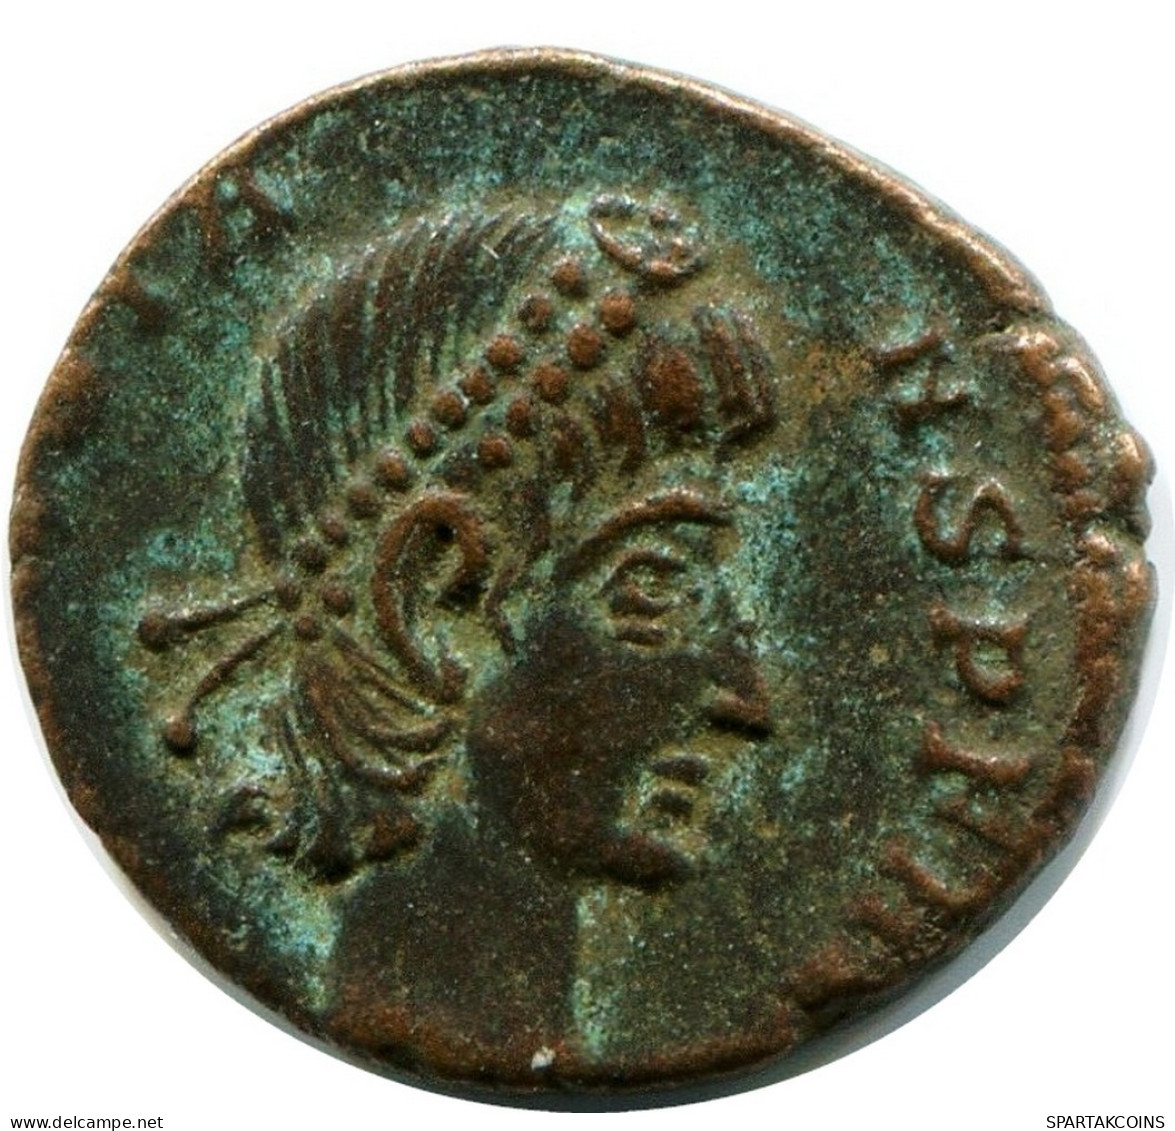 CONSTANS MINTED IN NICOMEDIA FROM THE ROYAL ONTARIO MUSEUM #ANC11723.14.U.A - L'Empire Chrétien (307 à 363)